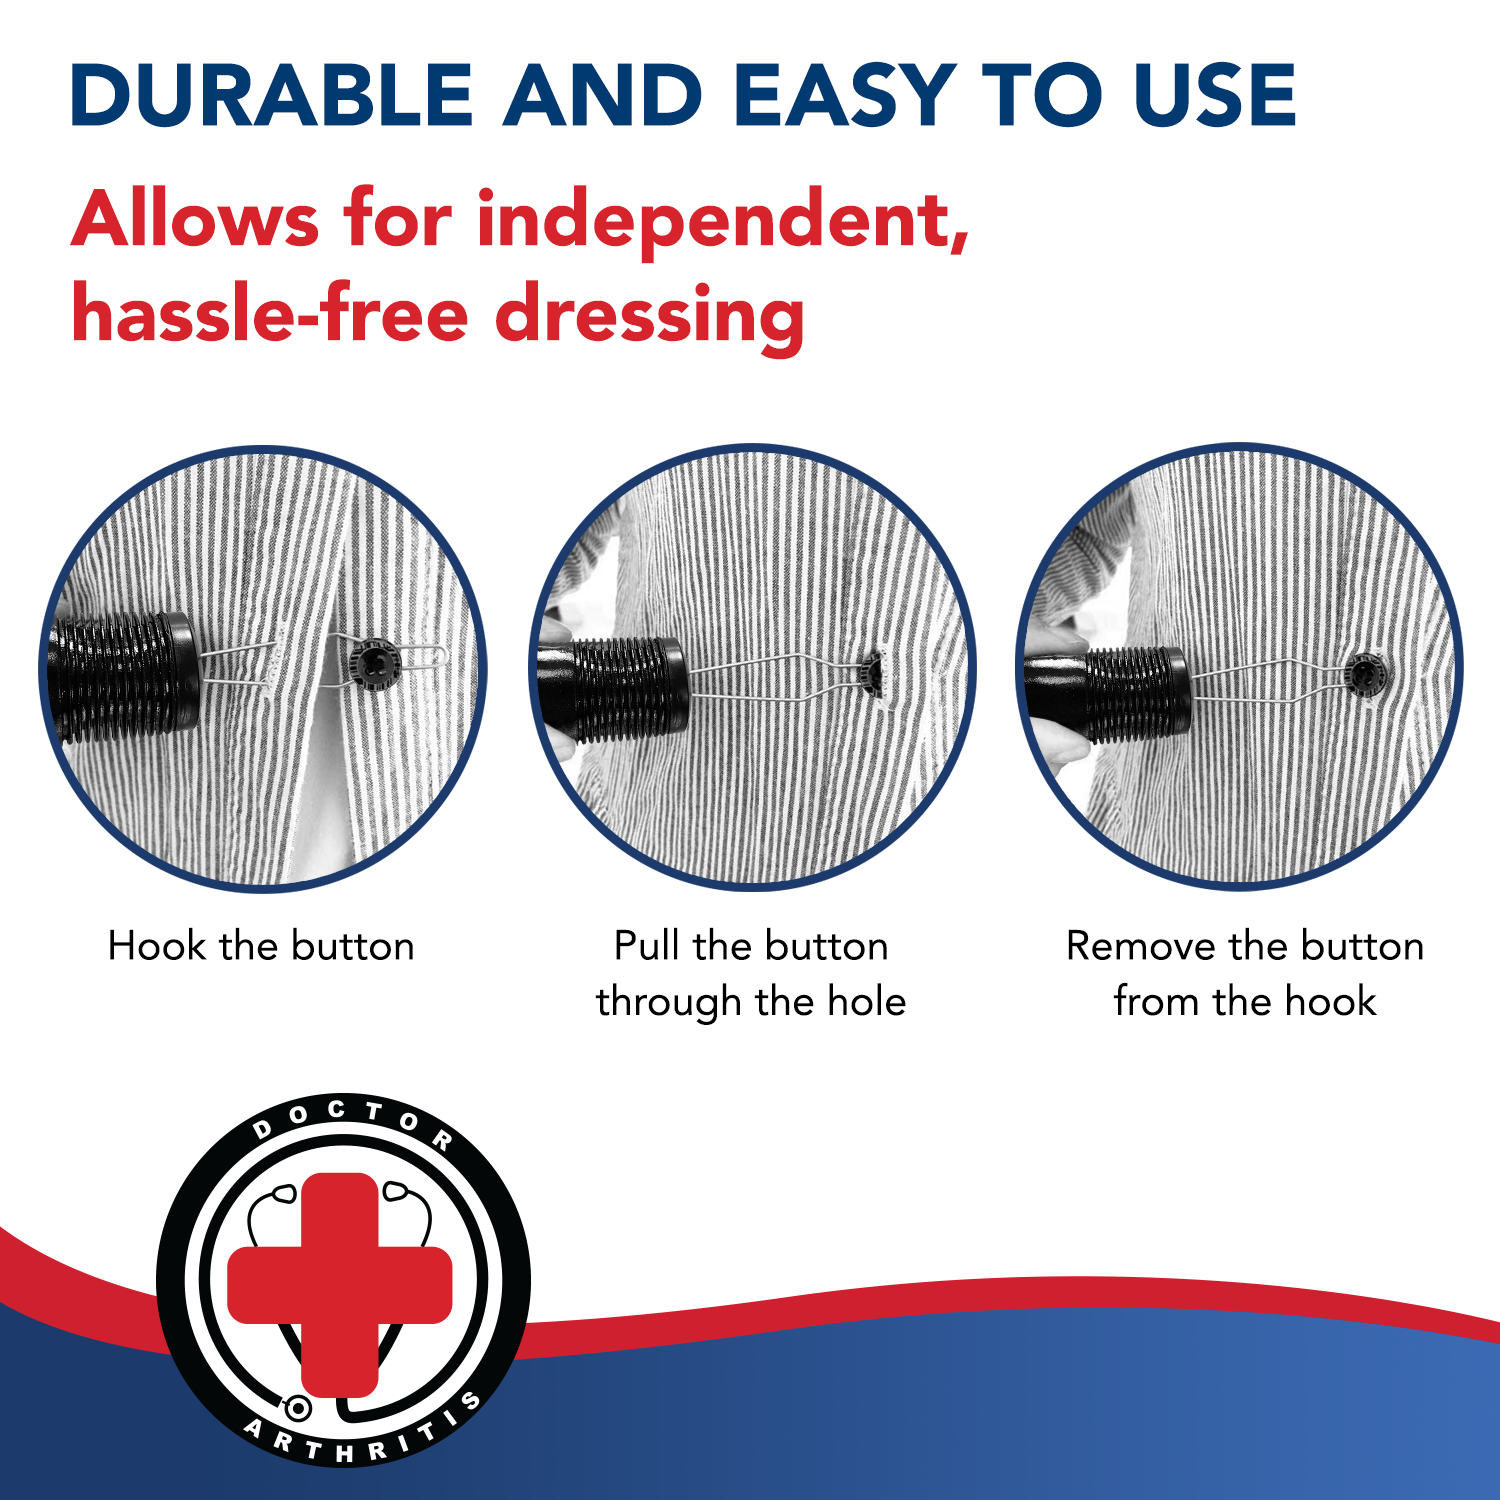 Button Hook & Zipper Pull, Assist, Helper Device, Dress Clothes Tool, Button Shirts Aid, One Hand, Disability, Handicapped and Seniors by Dr. Arthritis